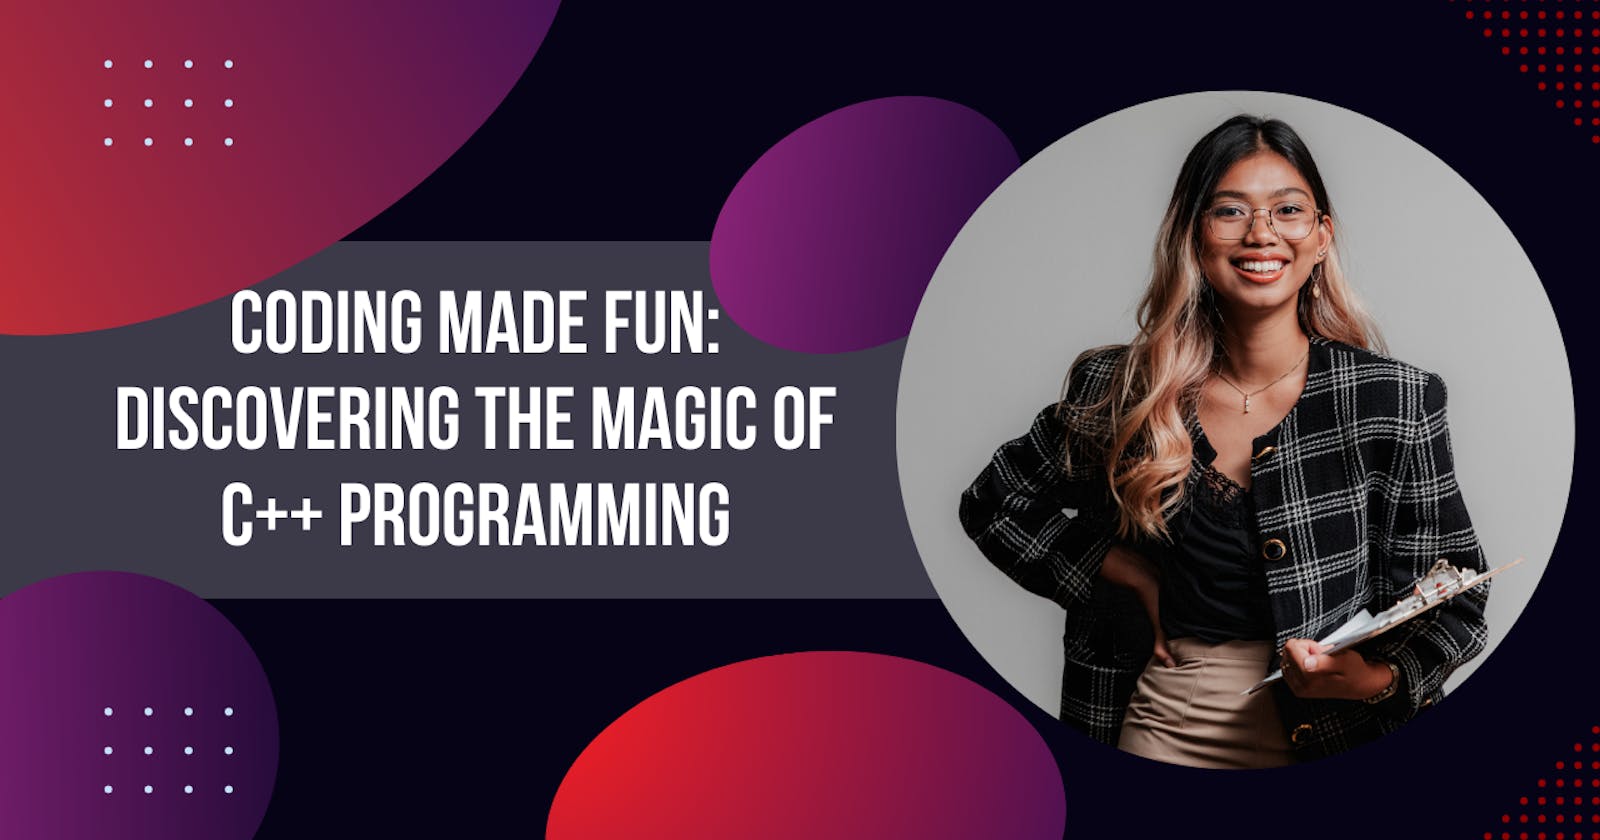 Coding Made Fun: Discovering the Magic of C++ Programming